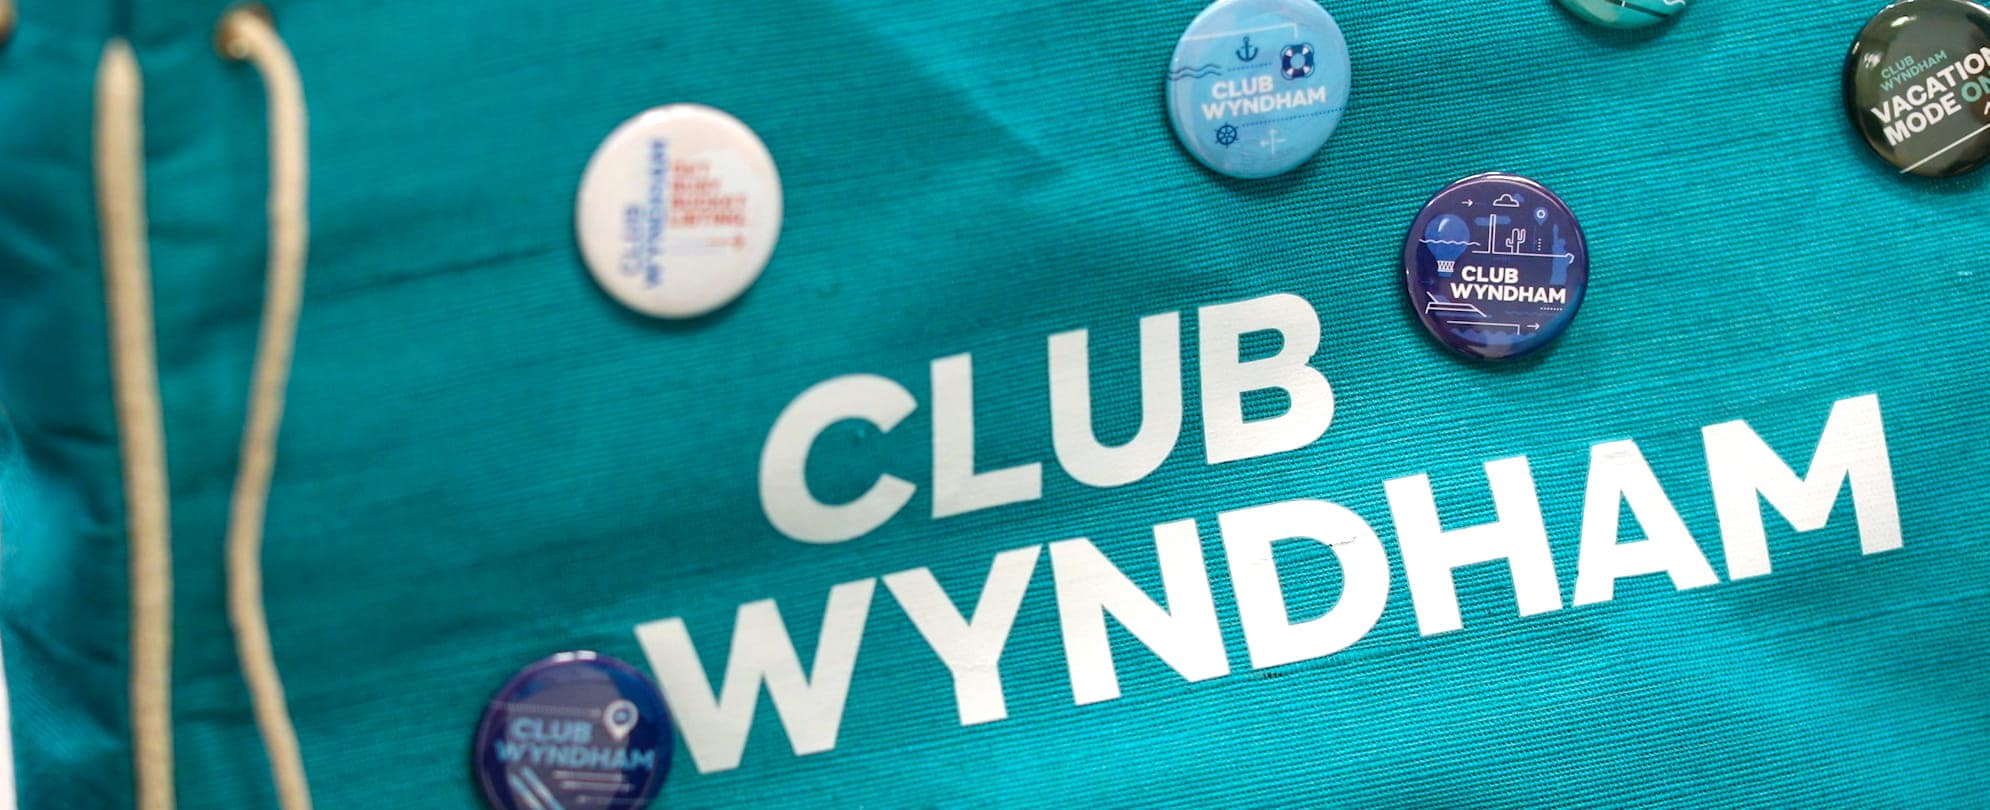 A teal Club Wyndham bag with six Pinspiration pins pinned on the bag